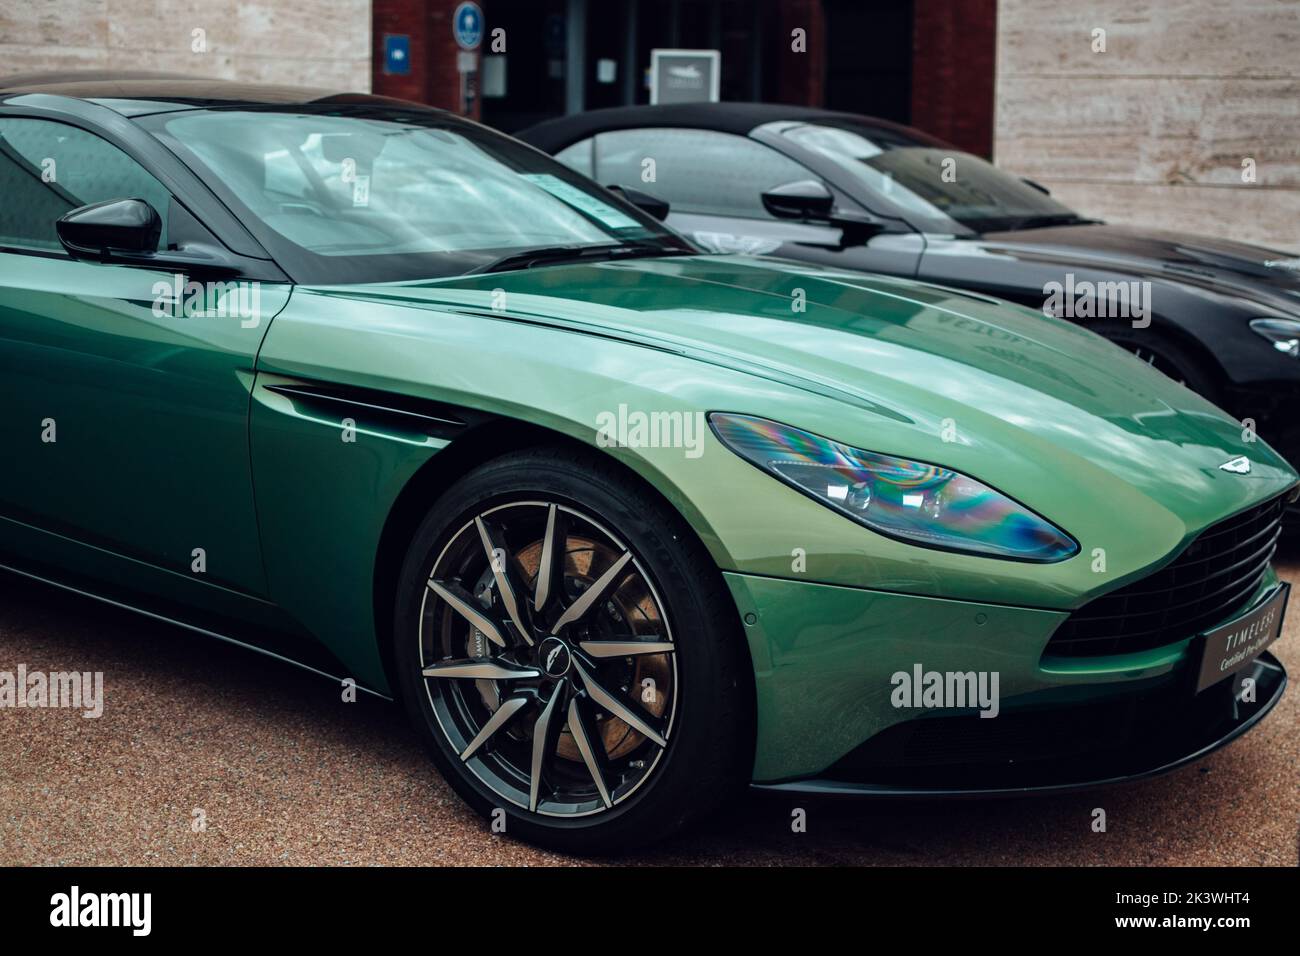 A green Aston Martin car at the Aston Martin showroom in Wilmslow Stock  Photo - Alamy